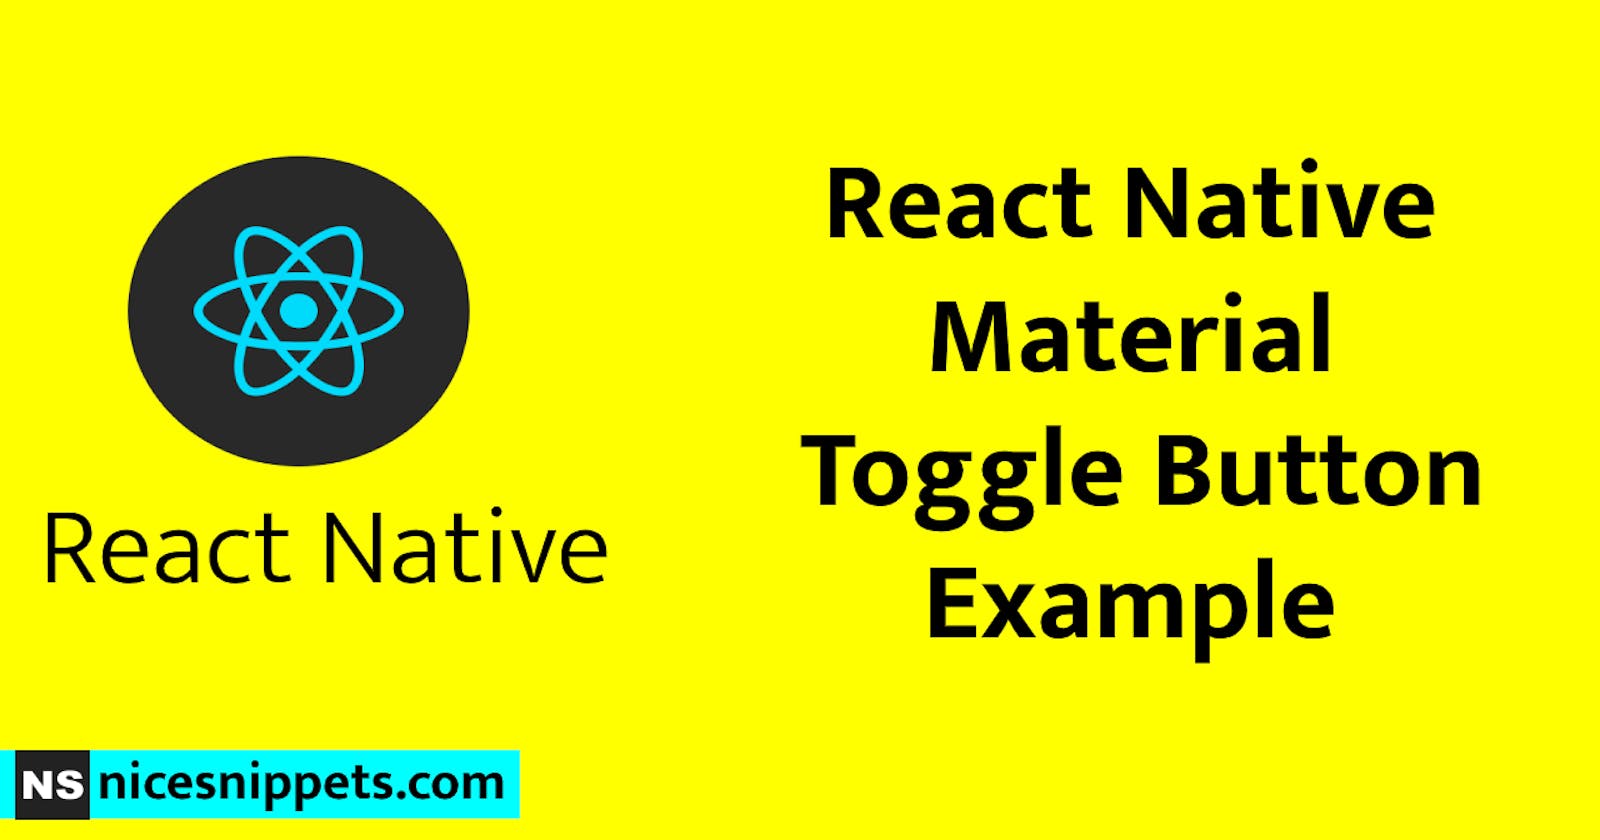 React Native Material Toggle Button Example